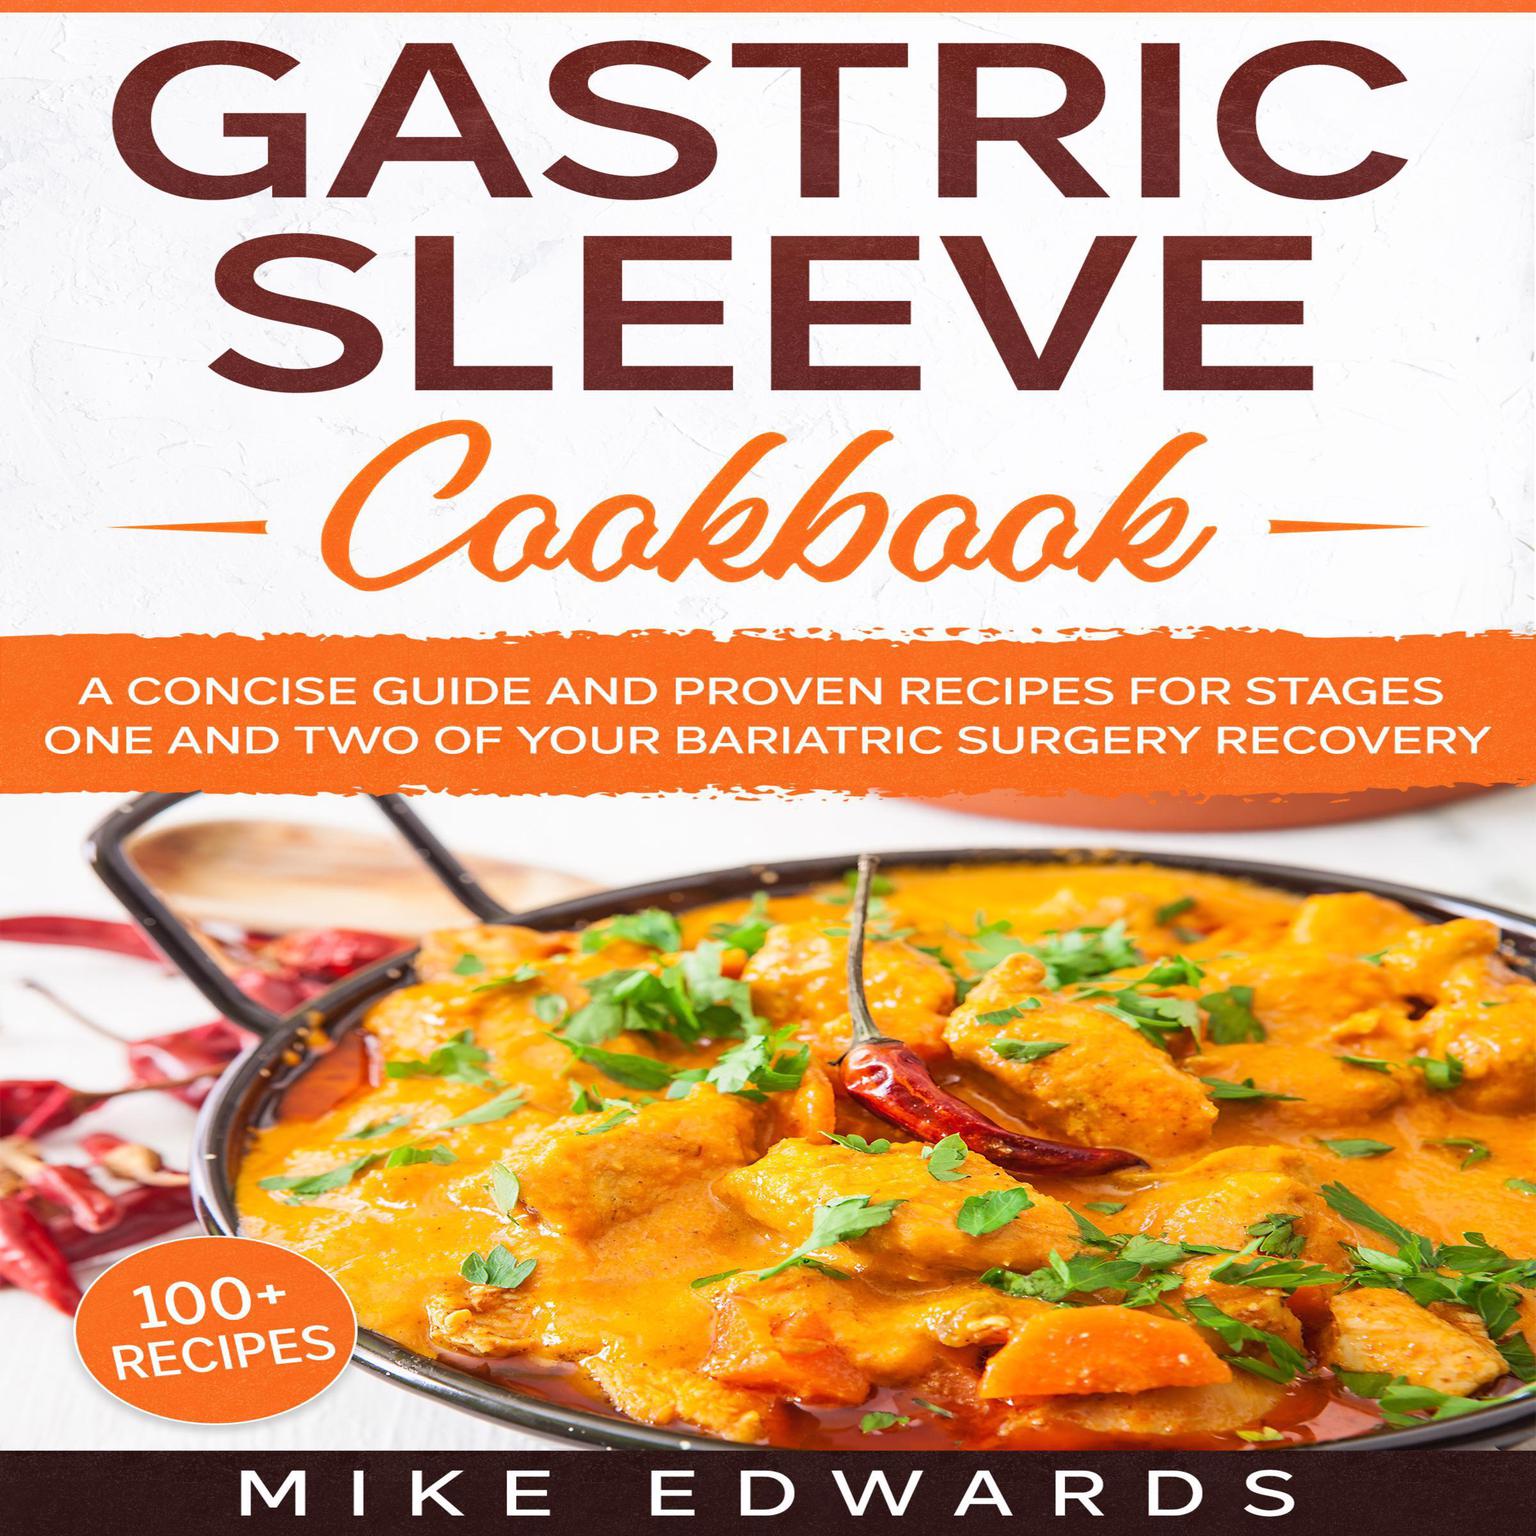 Gastric Sleeve Cookbook: A Concise Guide and Proven Recipes for Stages One and Two of your Bariatric Surgery Recovery Audiobook, by Mike Edwards